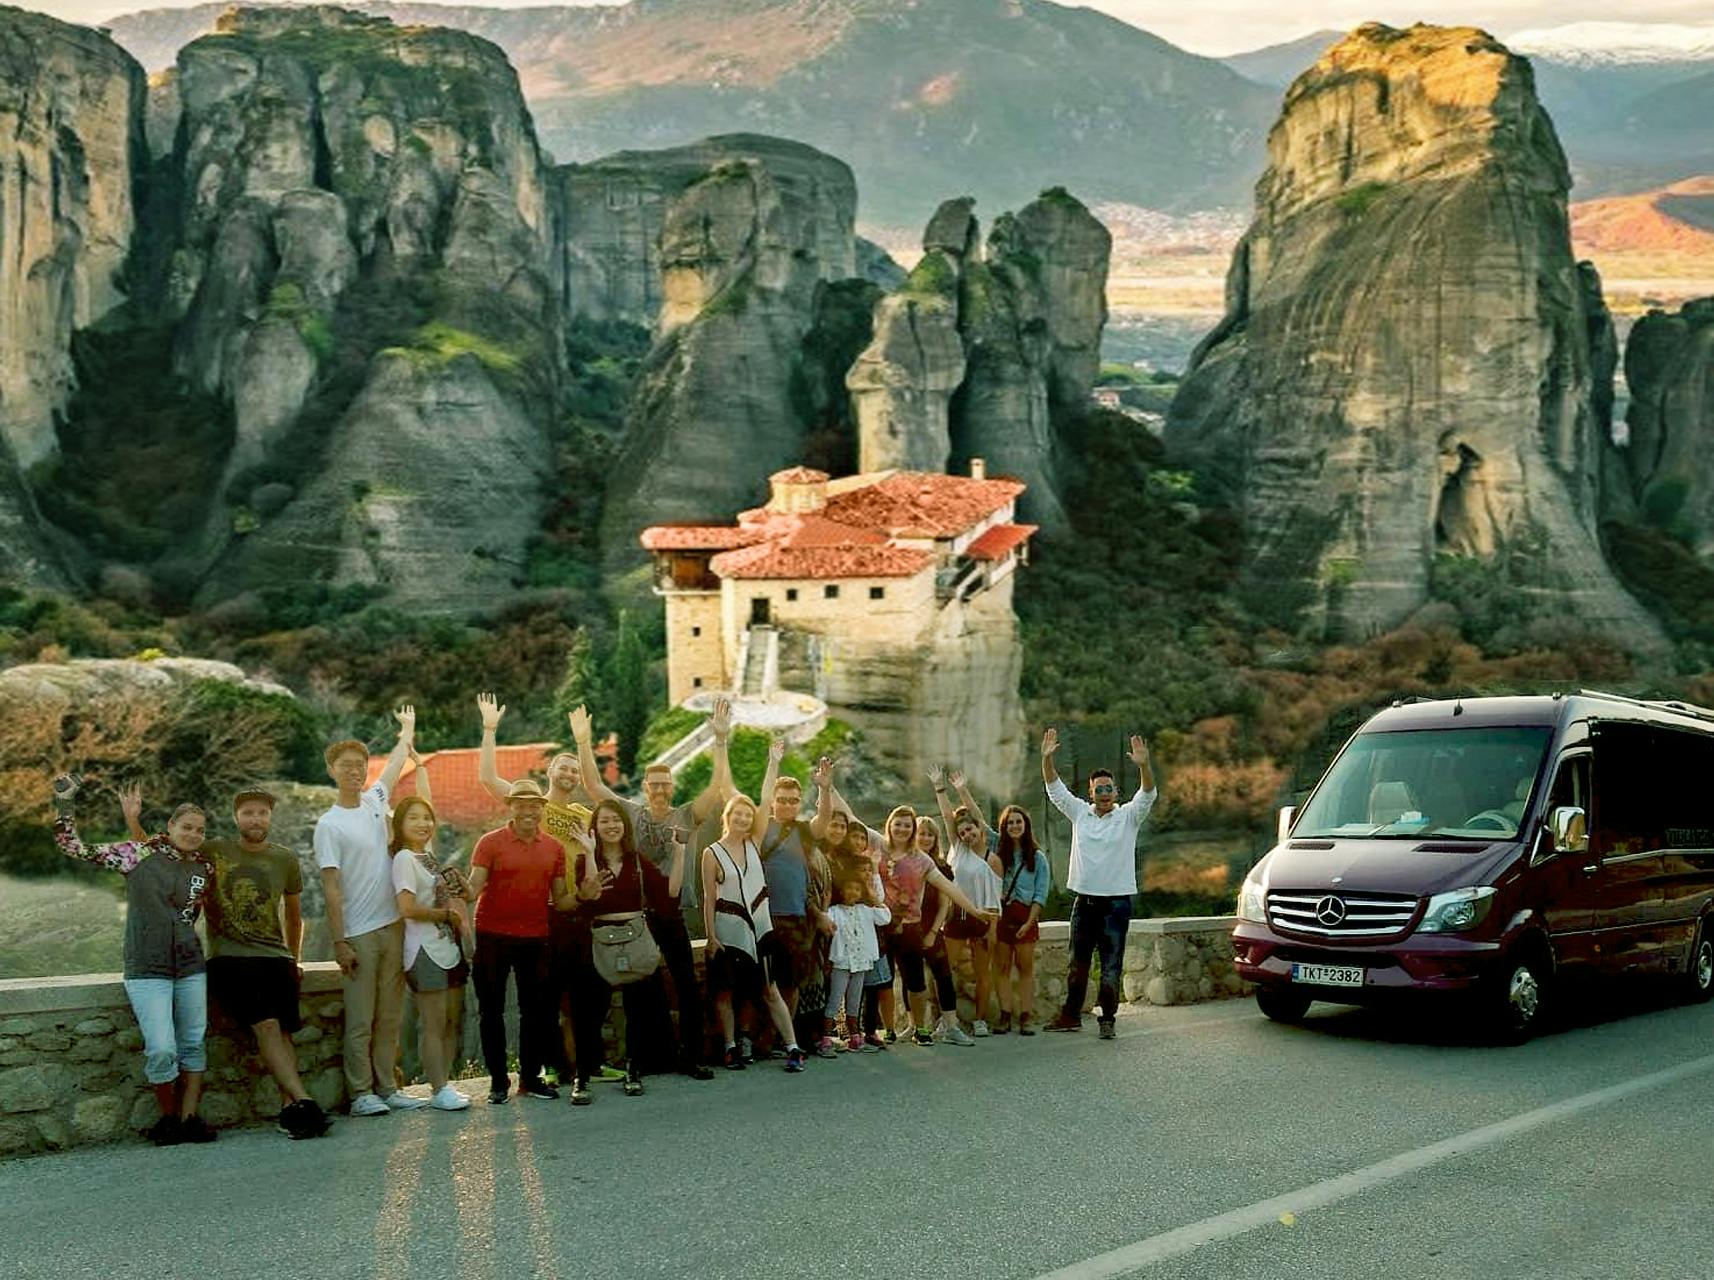 Meteora 1 day tour from Athens by train with Hermit Caves Musement